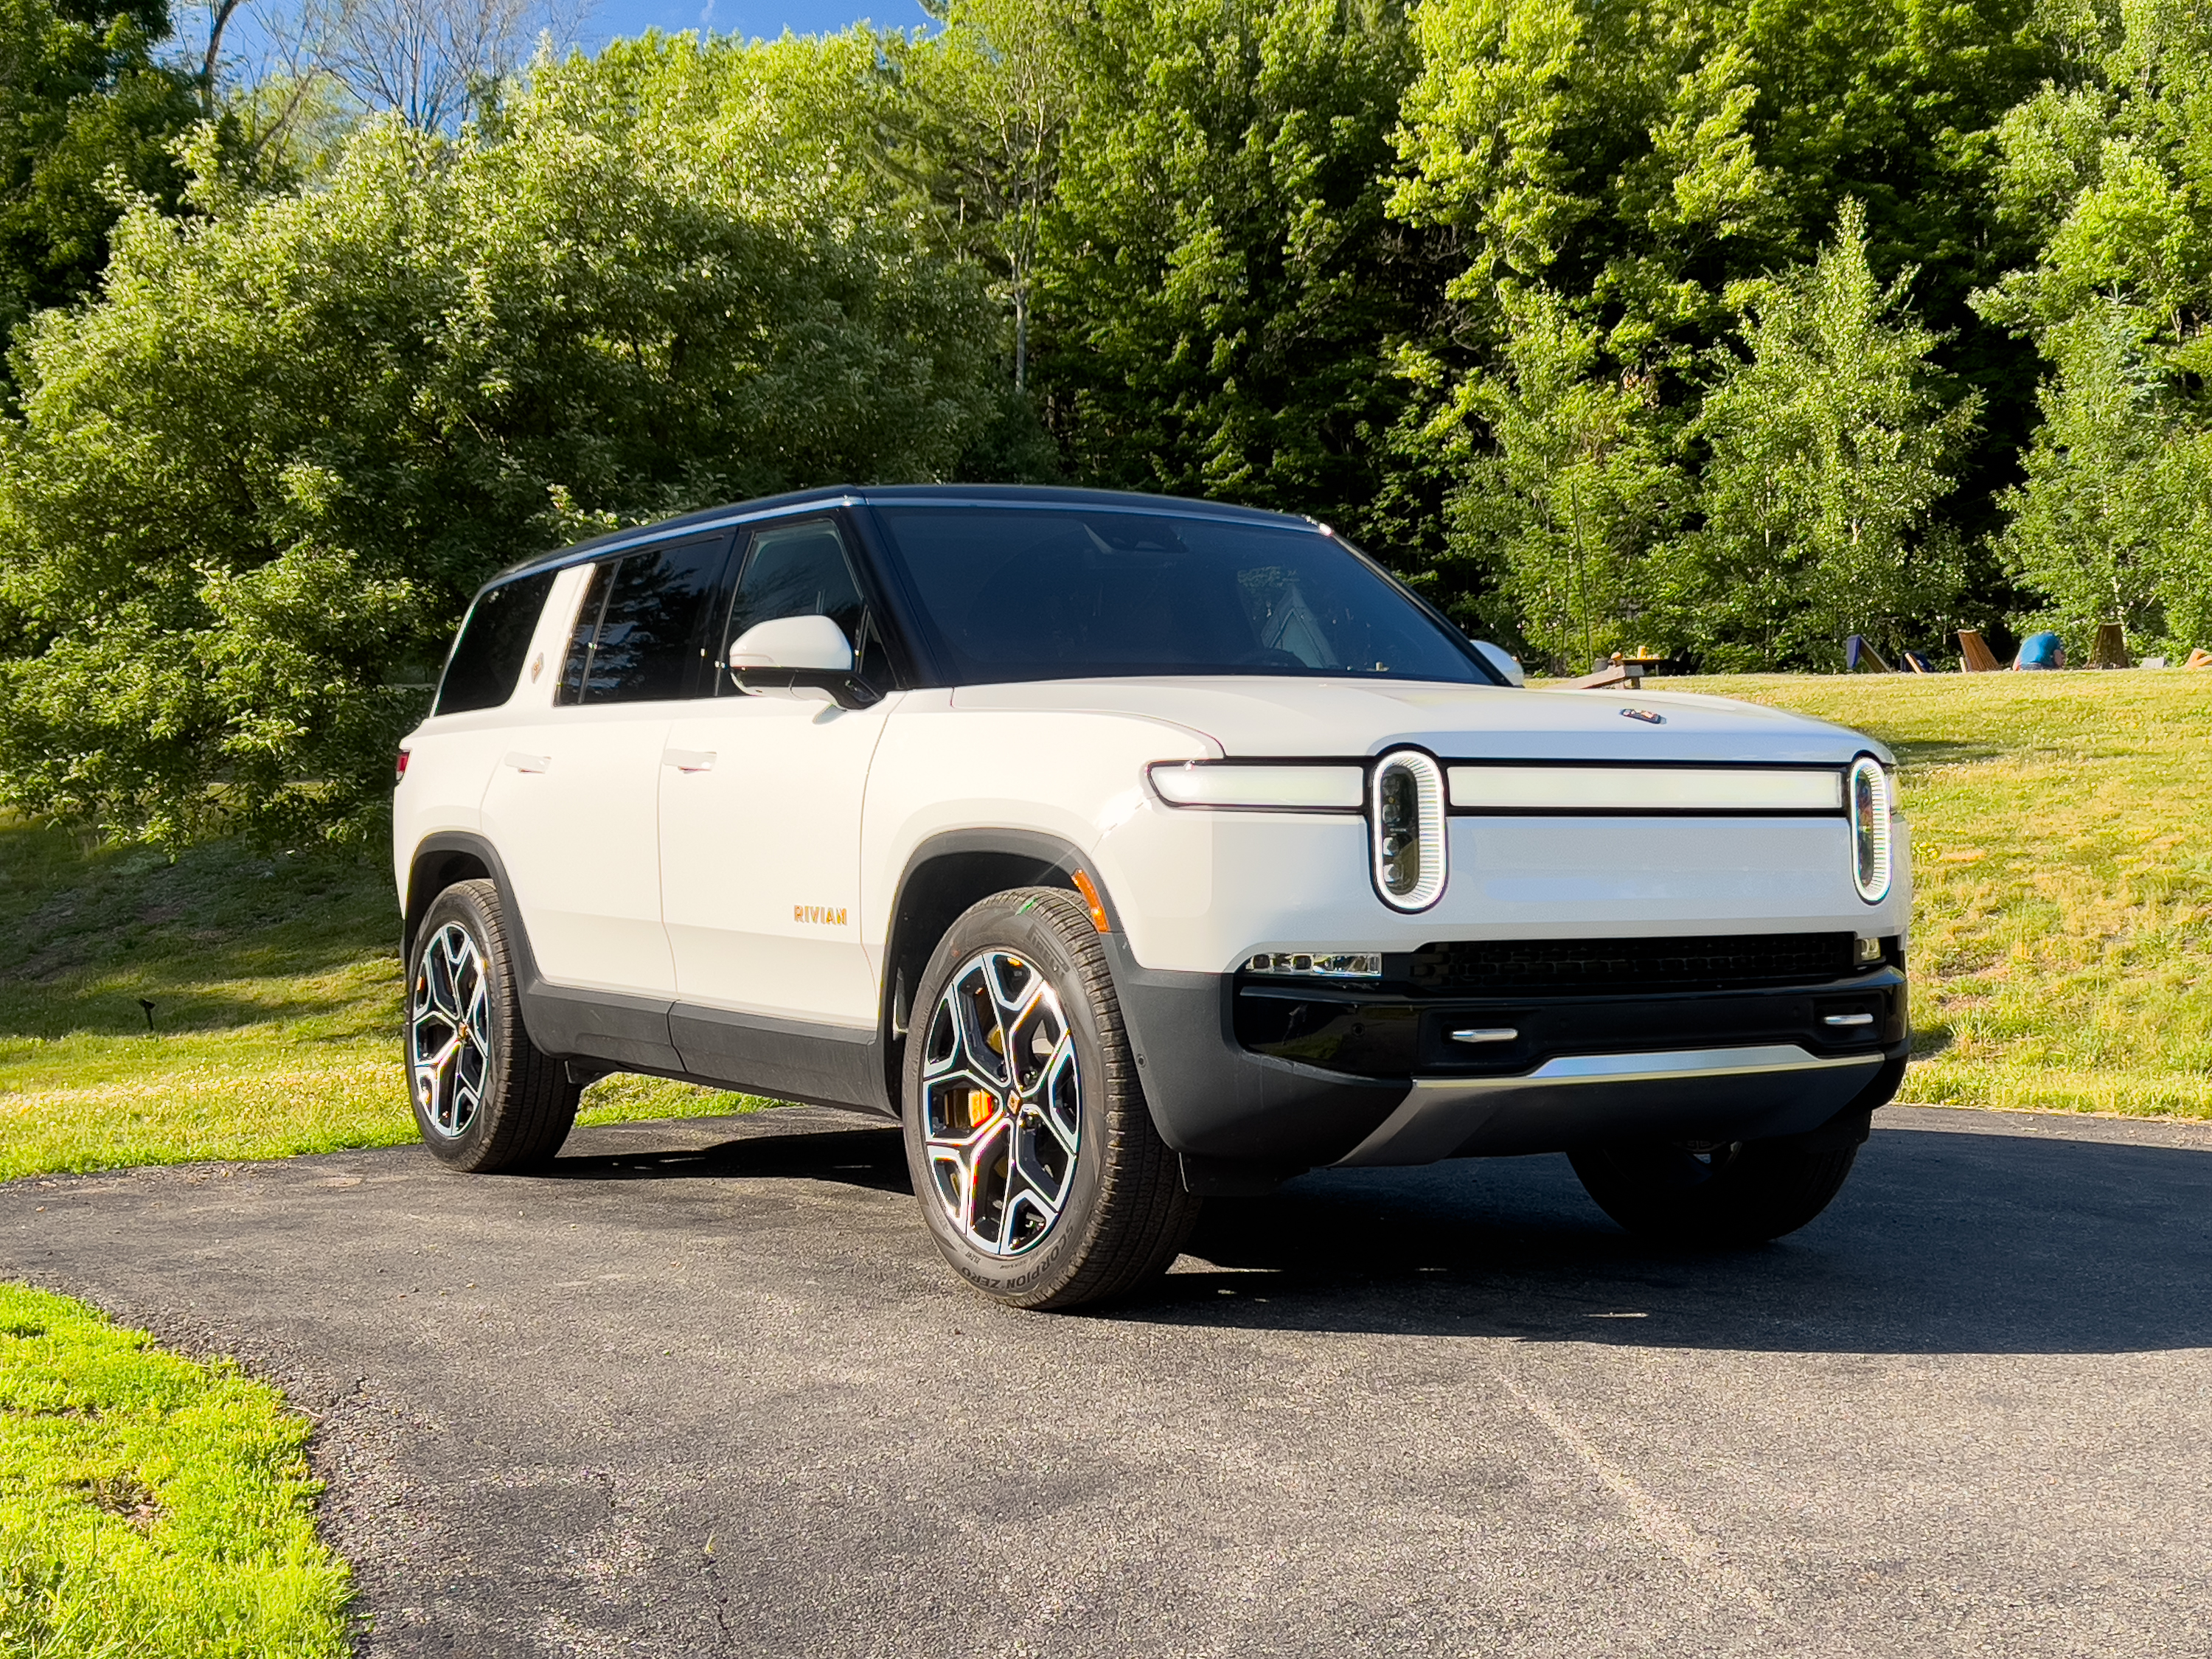 Enjoy Your Rivian Vehicle In All Environments, With Rivian's Snow Mode and Other Updates